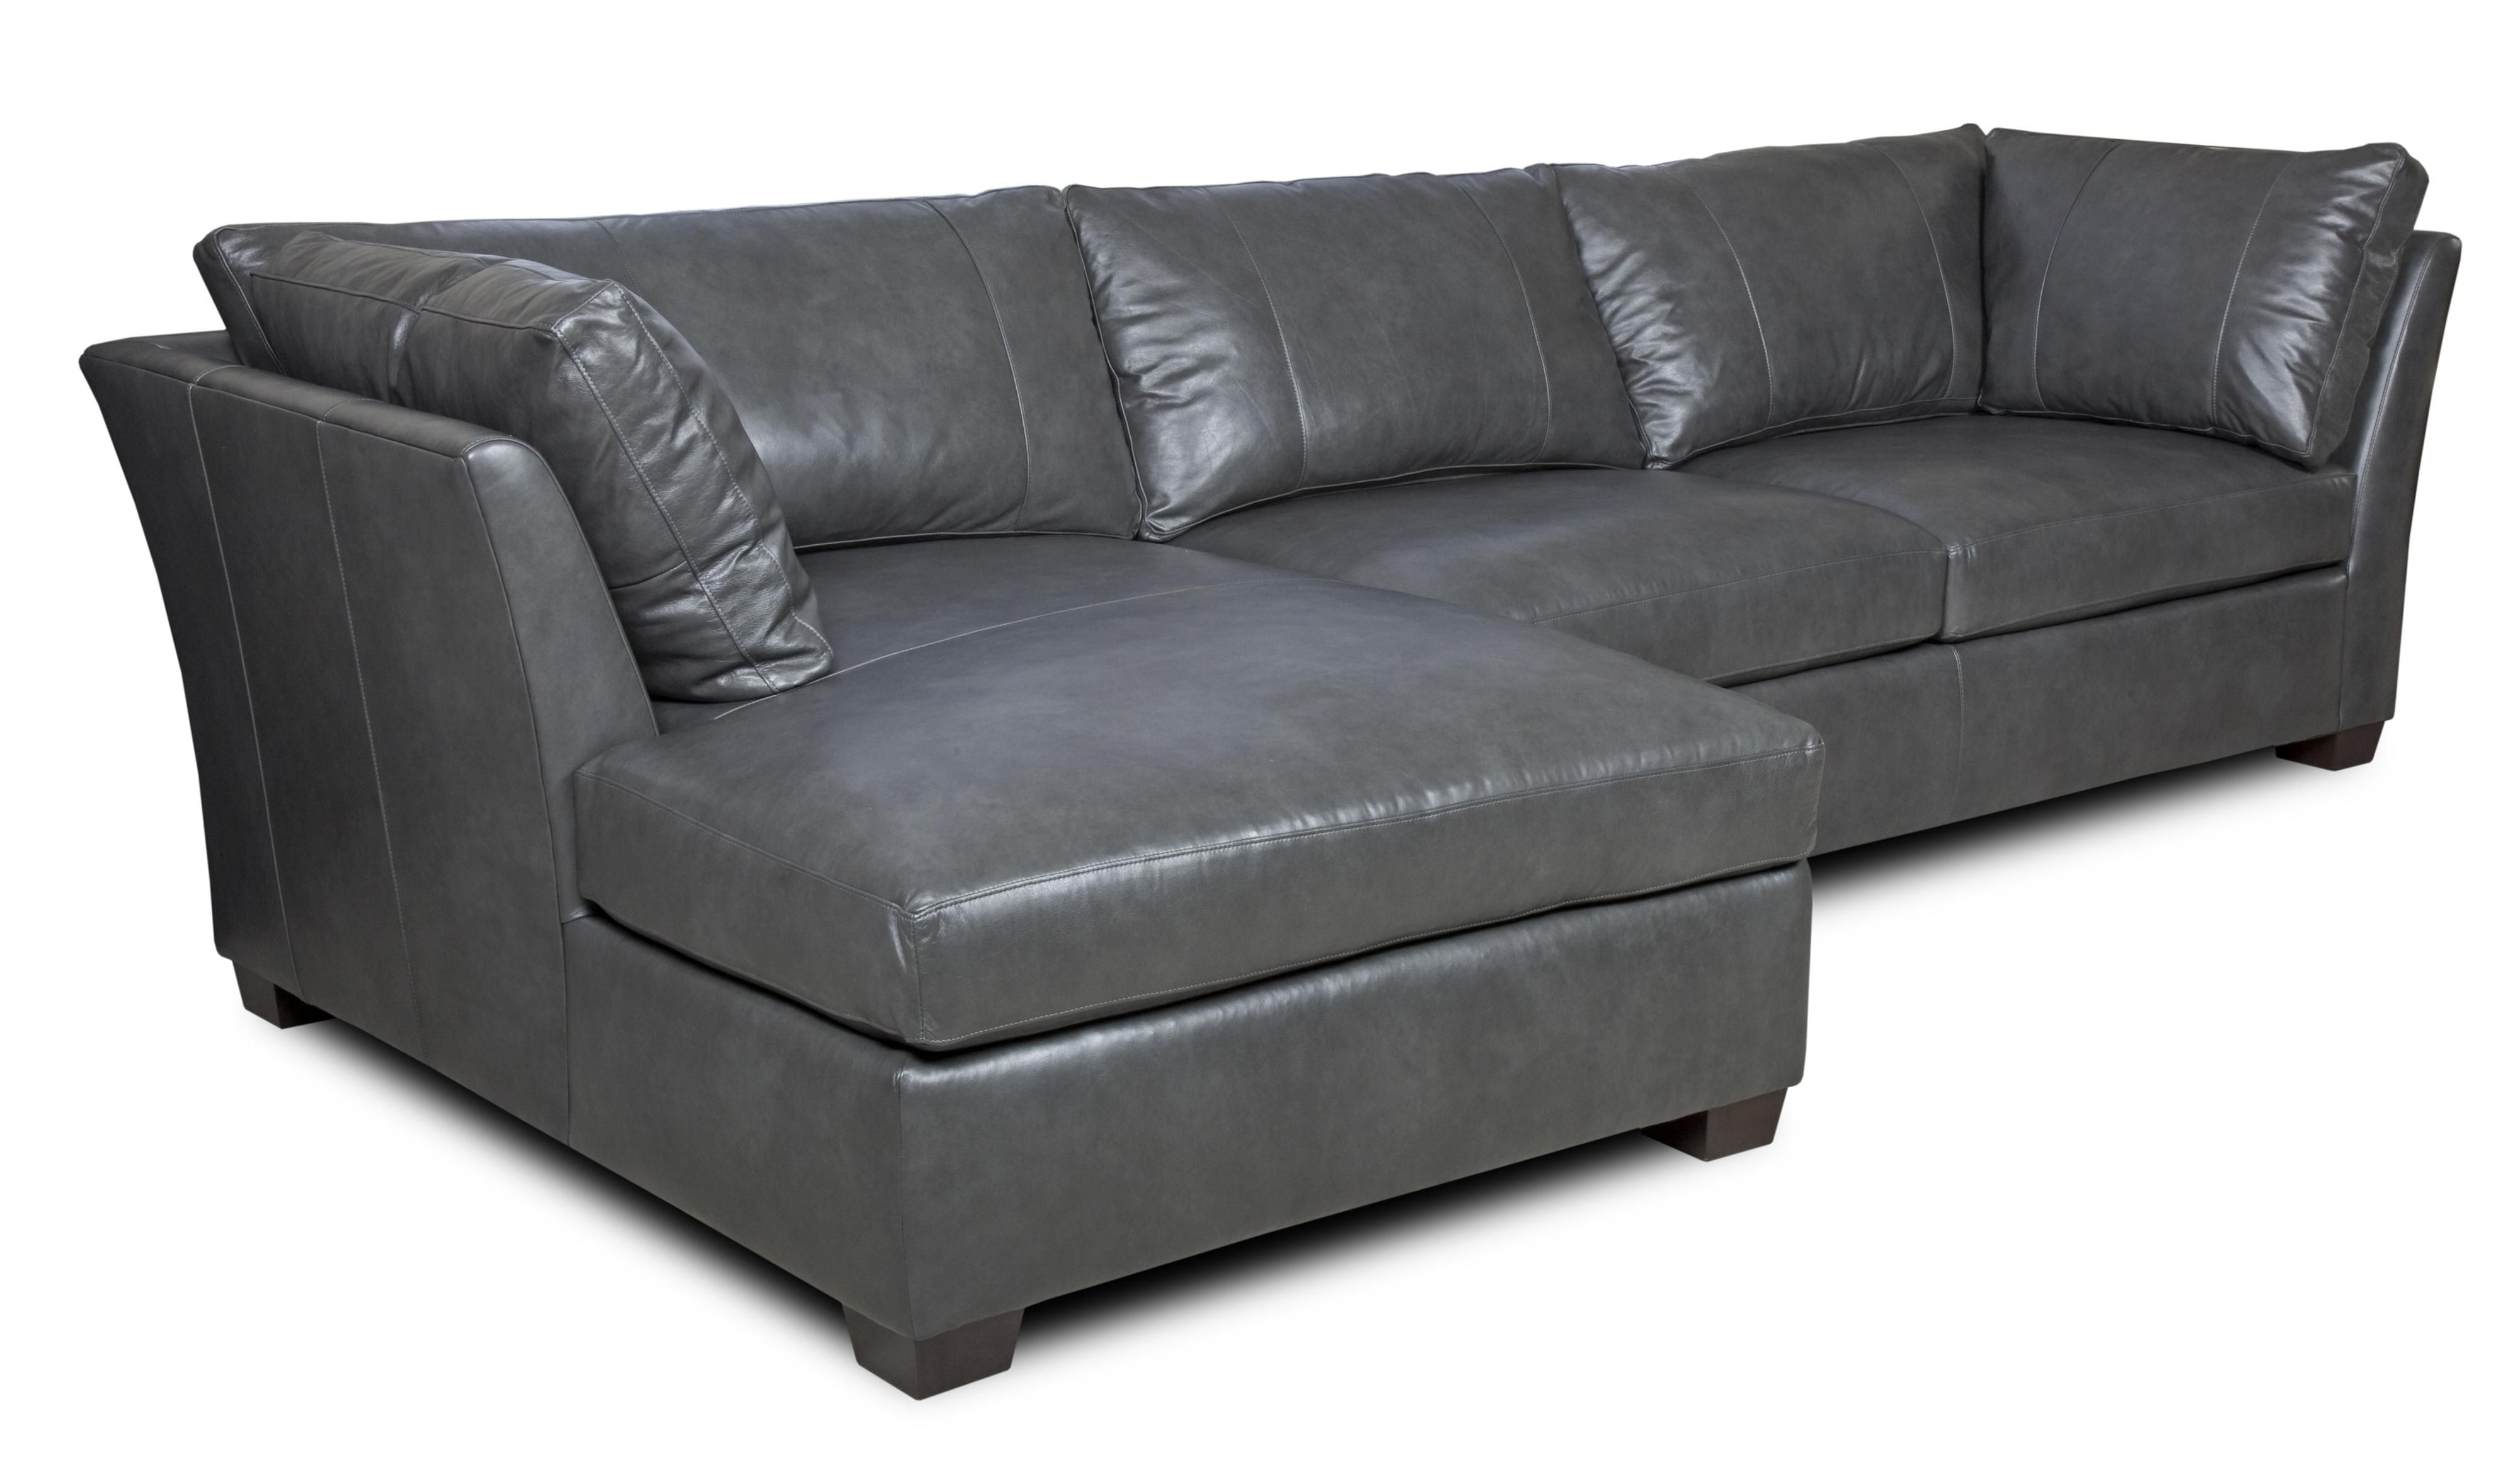 Bradington Young Mendell Contemporary Leather Sectional Sofa With For Visalia Ca Sectional Sofas (View 9 of 10)